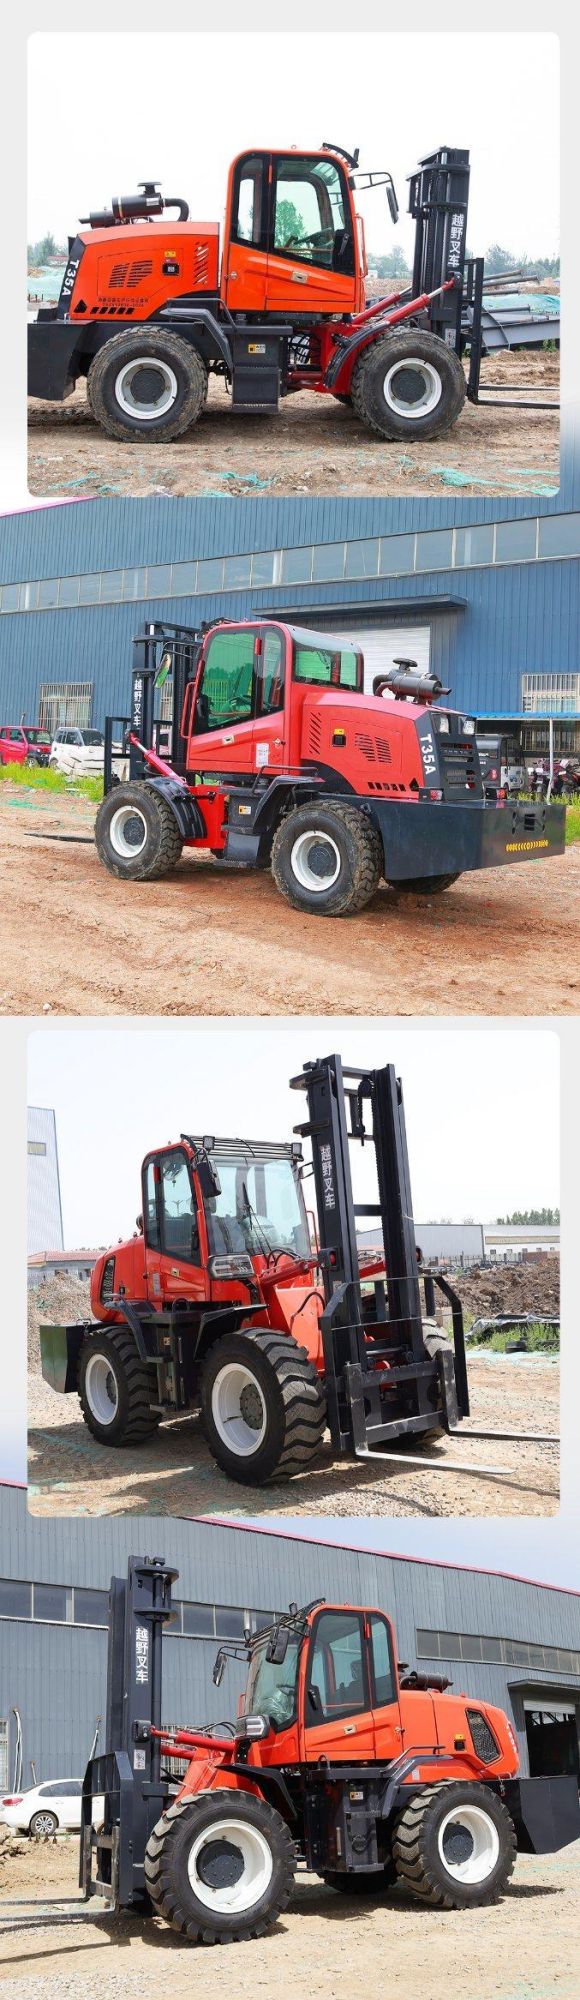 Hot Hydraulic 4X4 Drive Forklift off Road Four Wheel Drive All Terrain Forklift Applicable Warehouse Handling